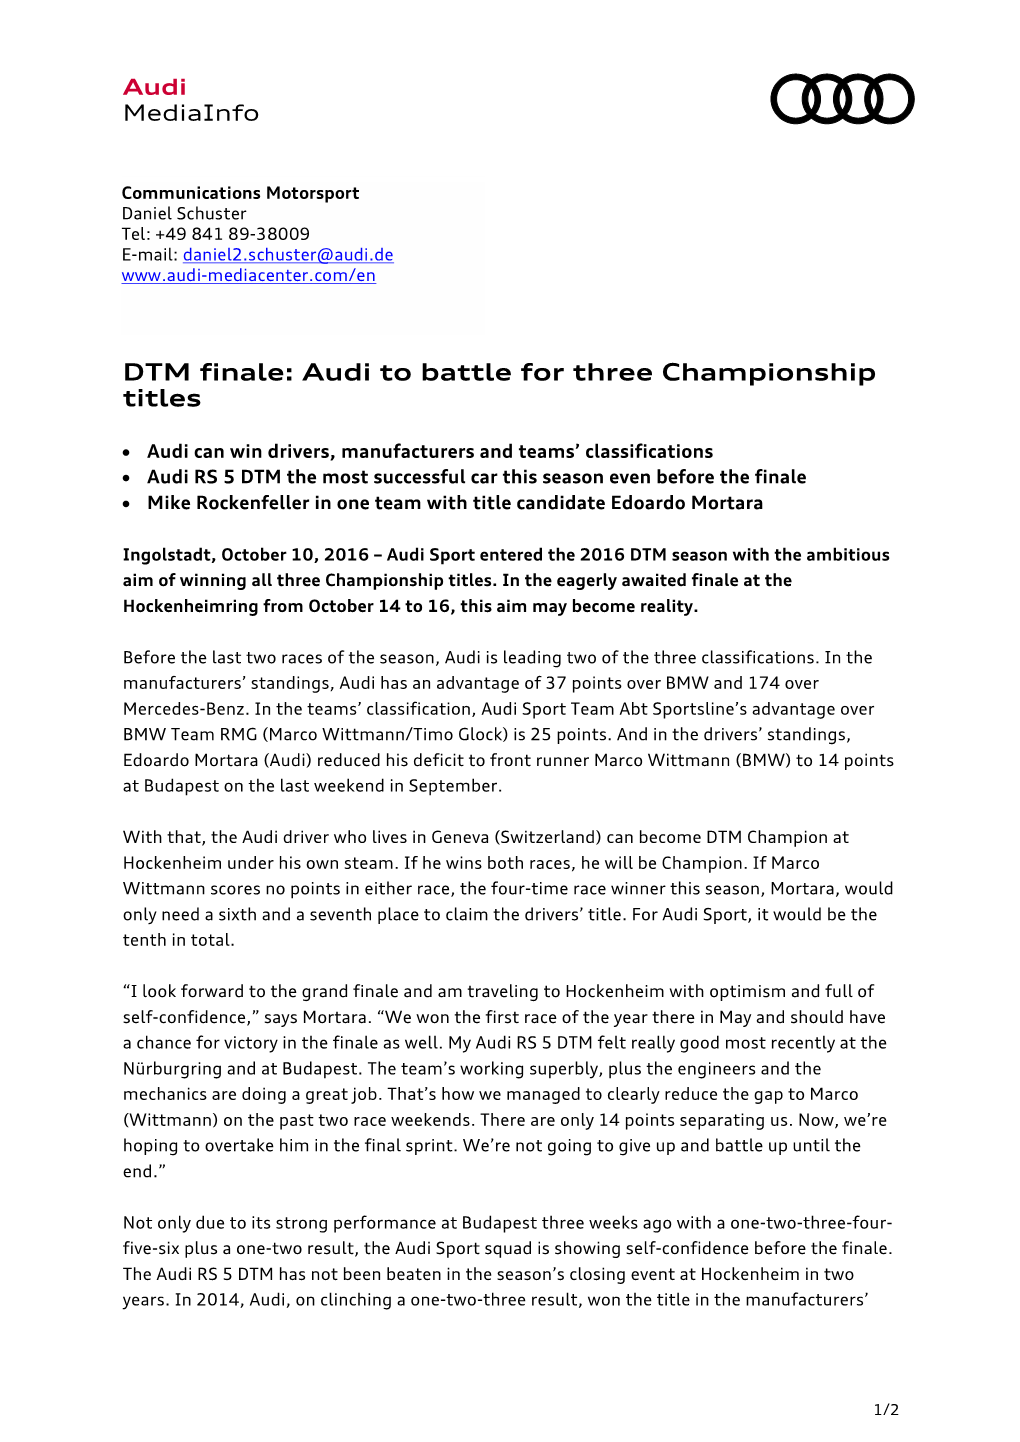 DTM Finale: Audi to Battle for Three Championship Titles